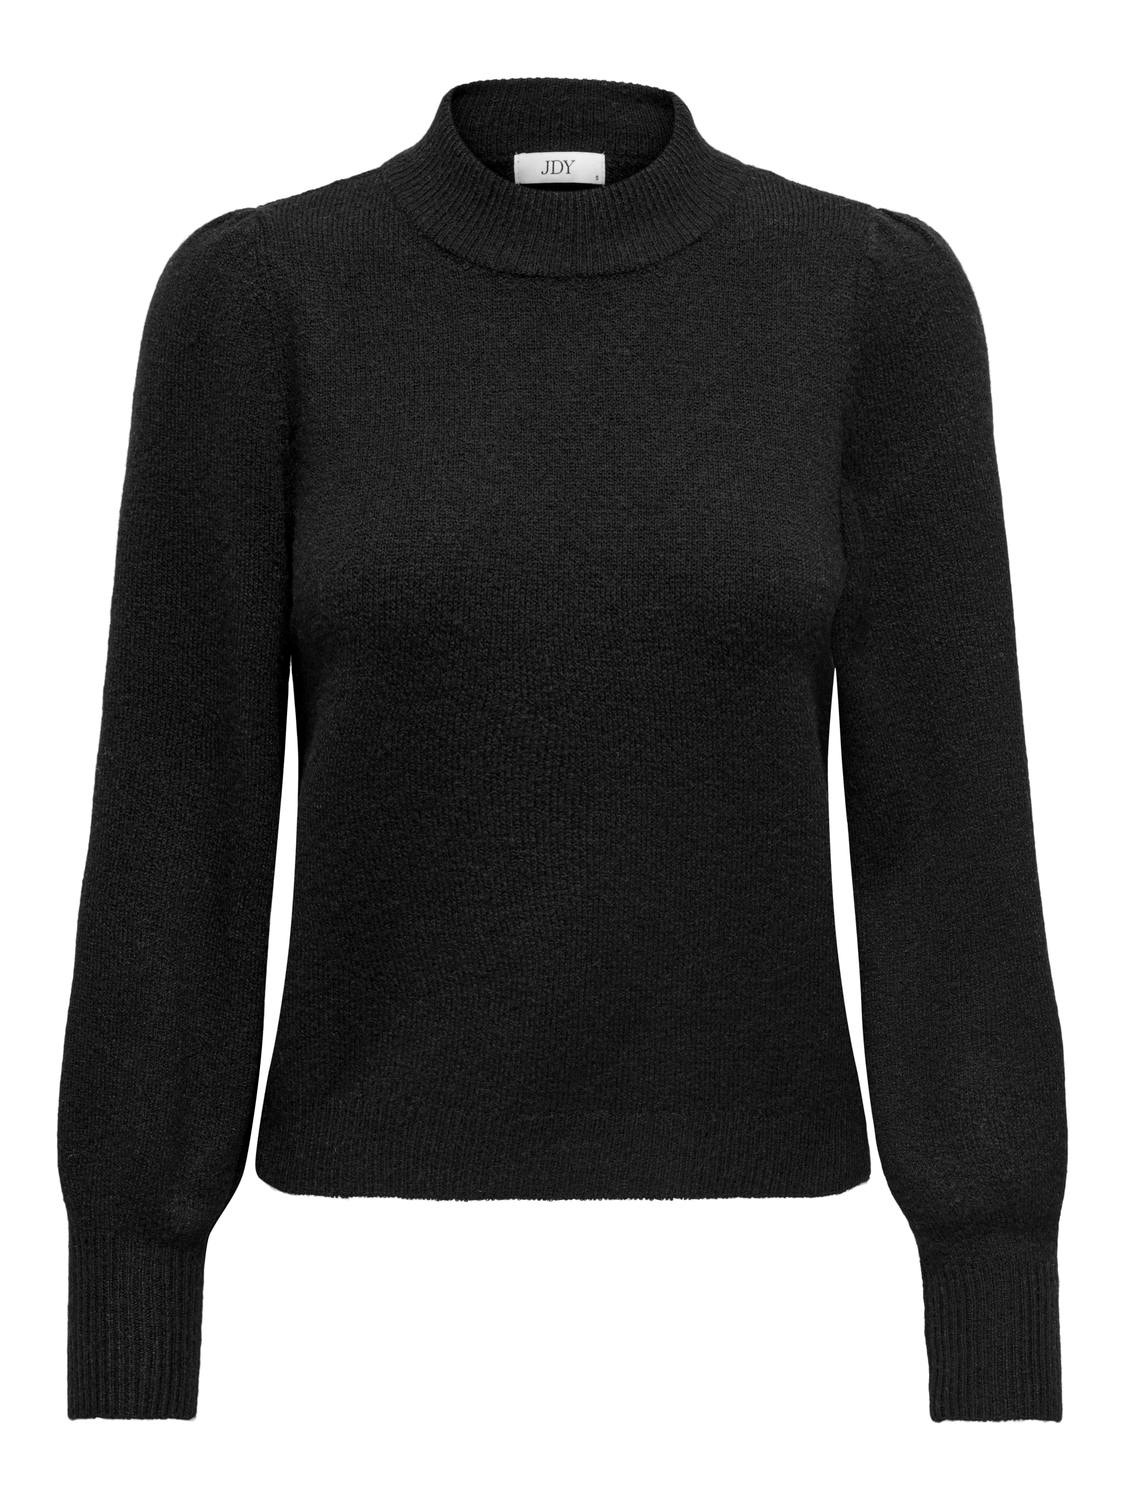 ONLY Knit Fit Round Neck High cuffs Balloon sleeves Pullover -Black - 15216638